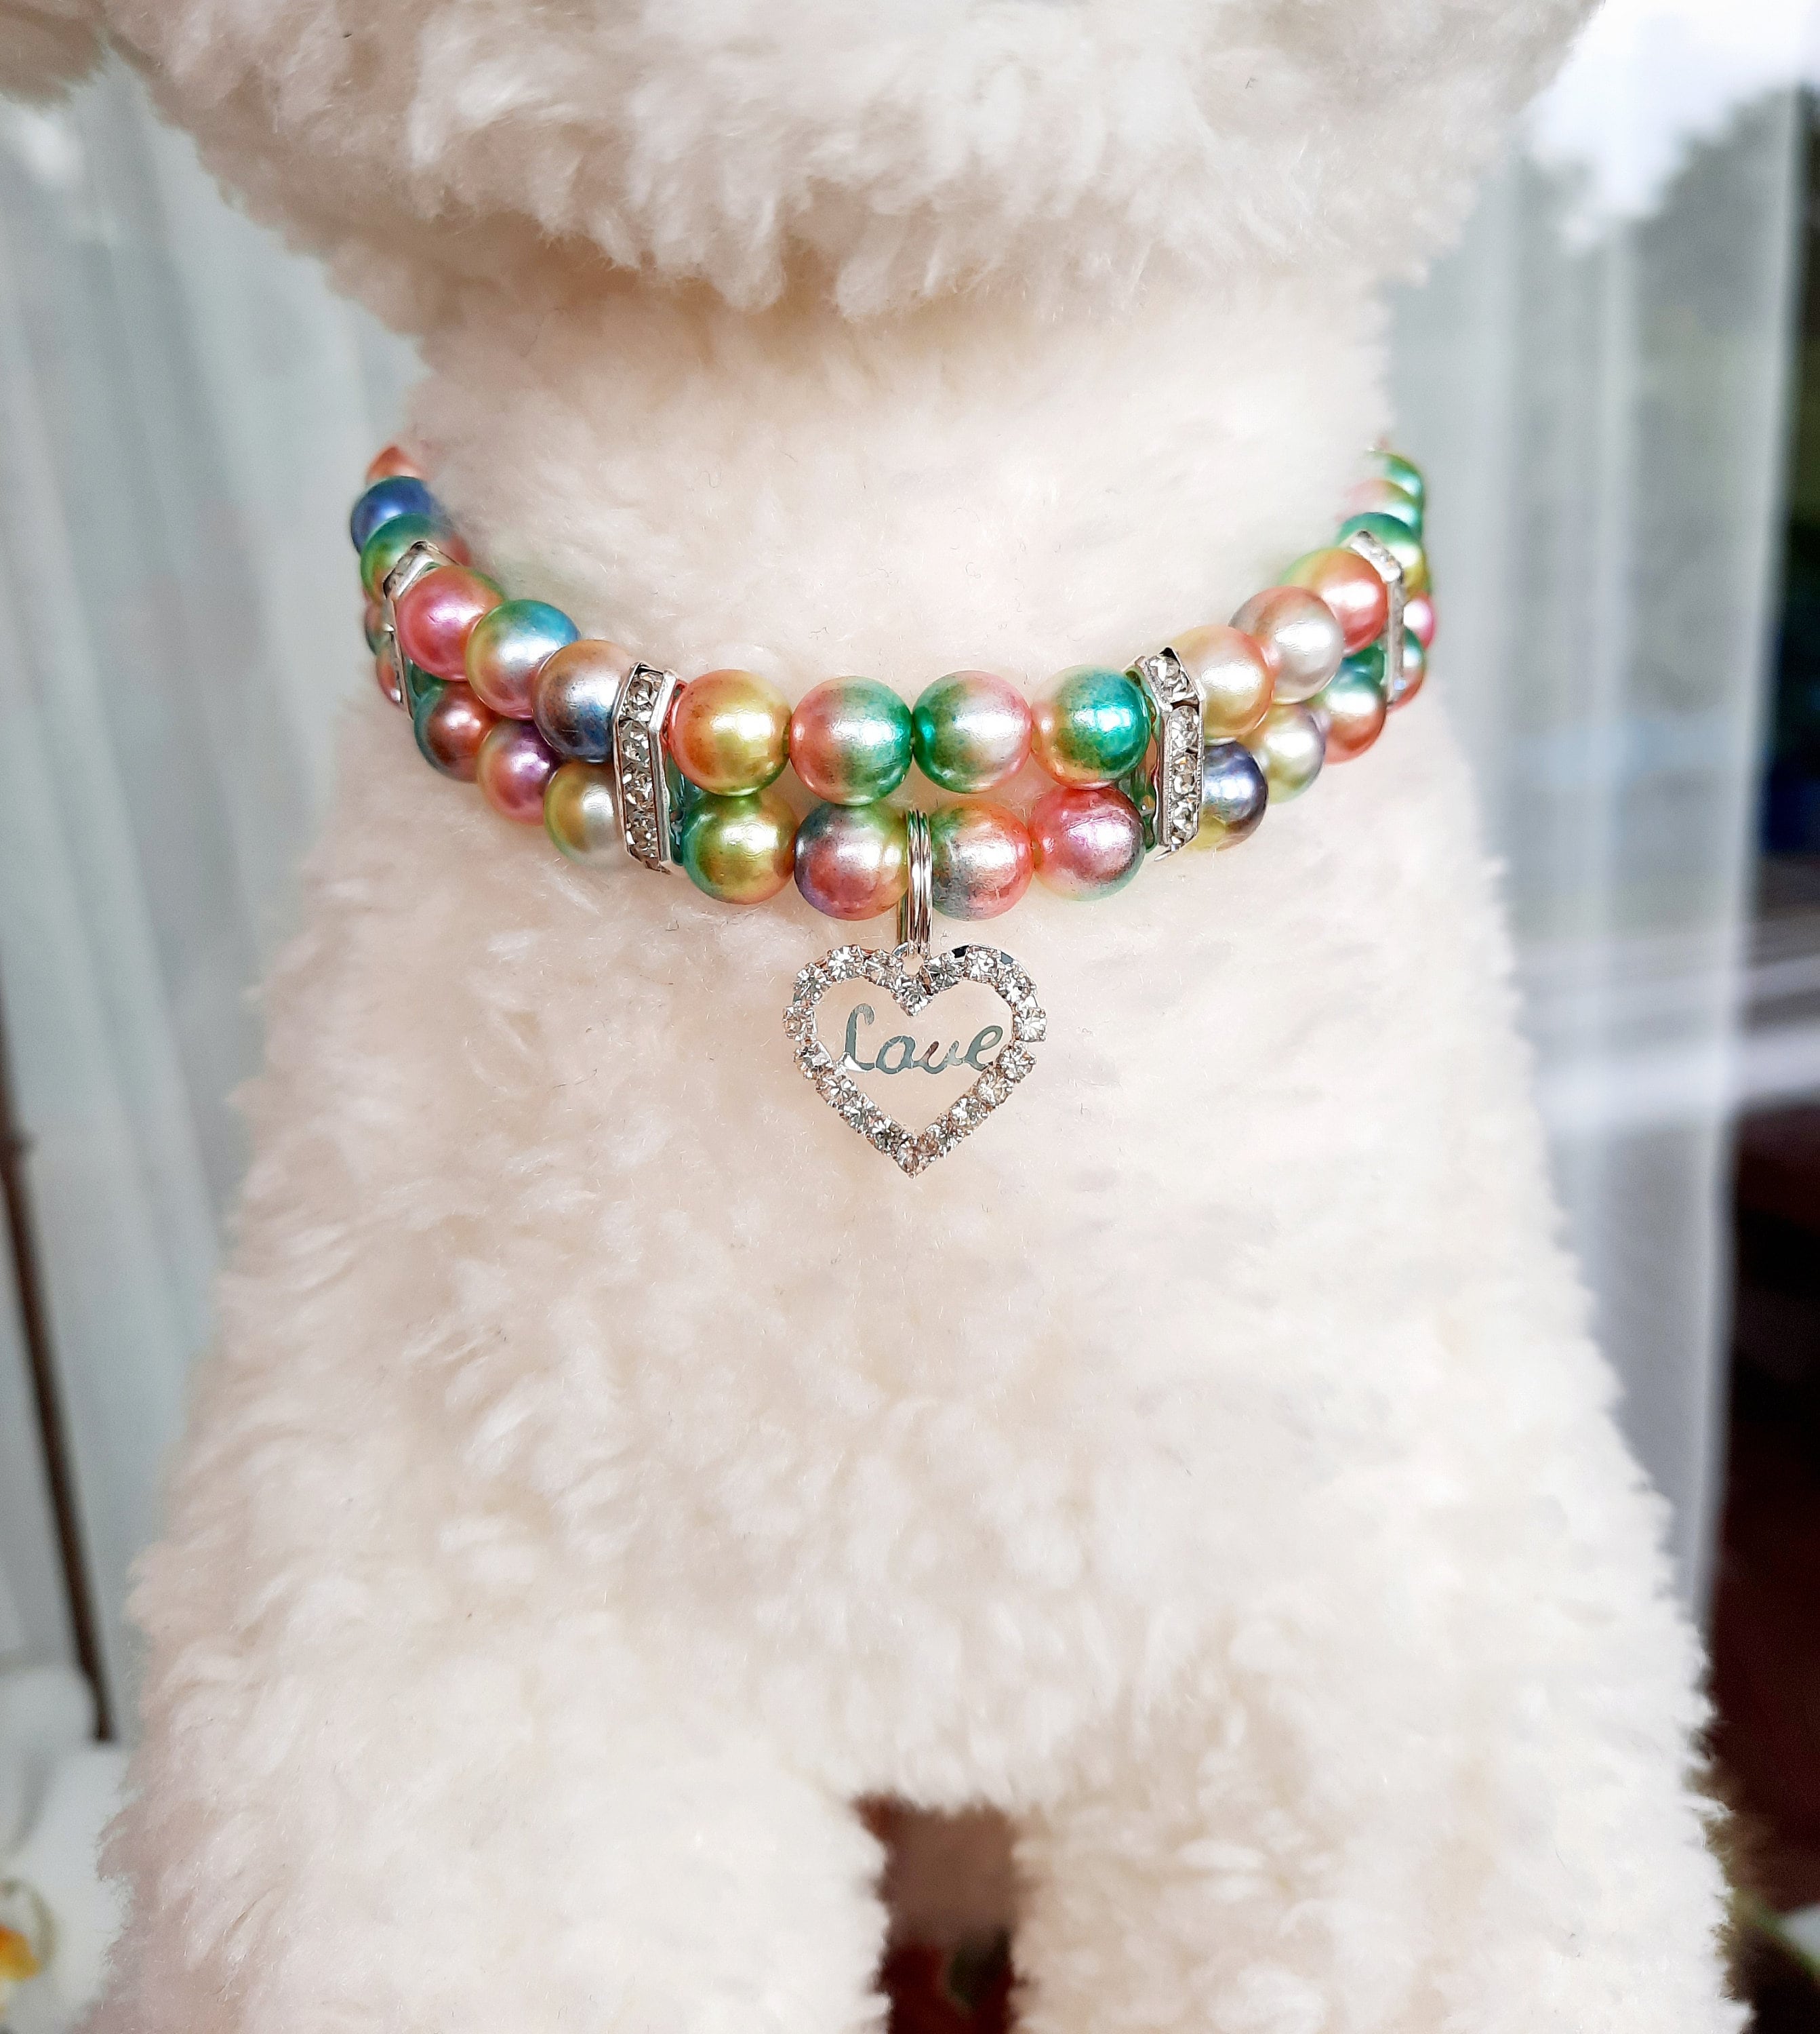 Buy jeweled designer dog collar with a stone pearl color and suspension